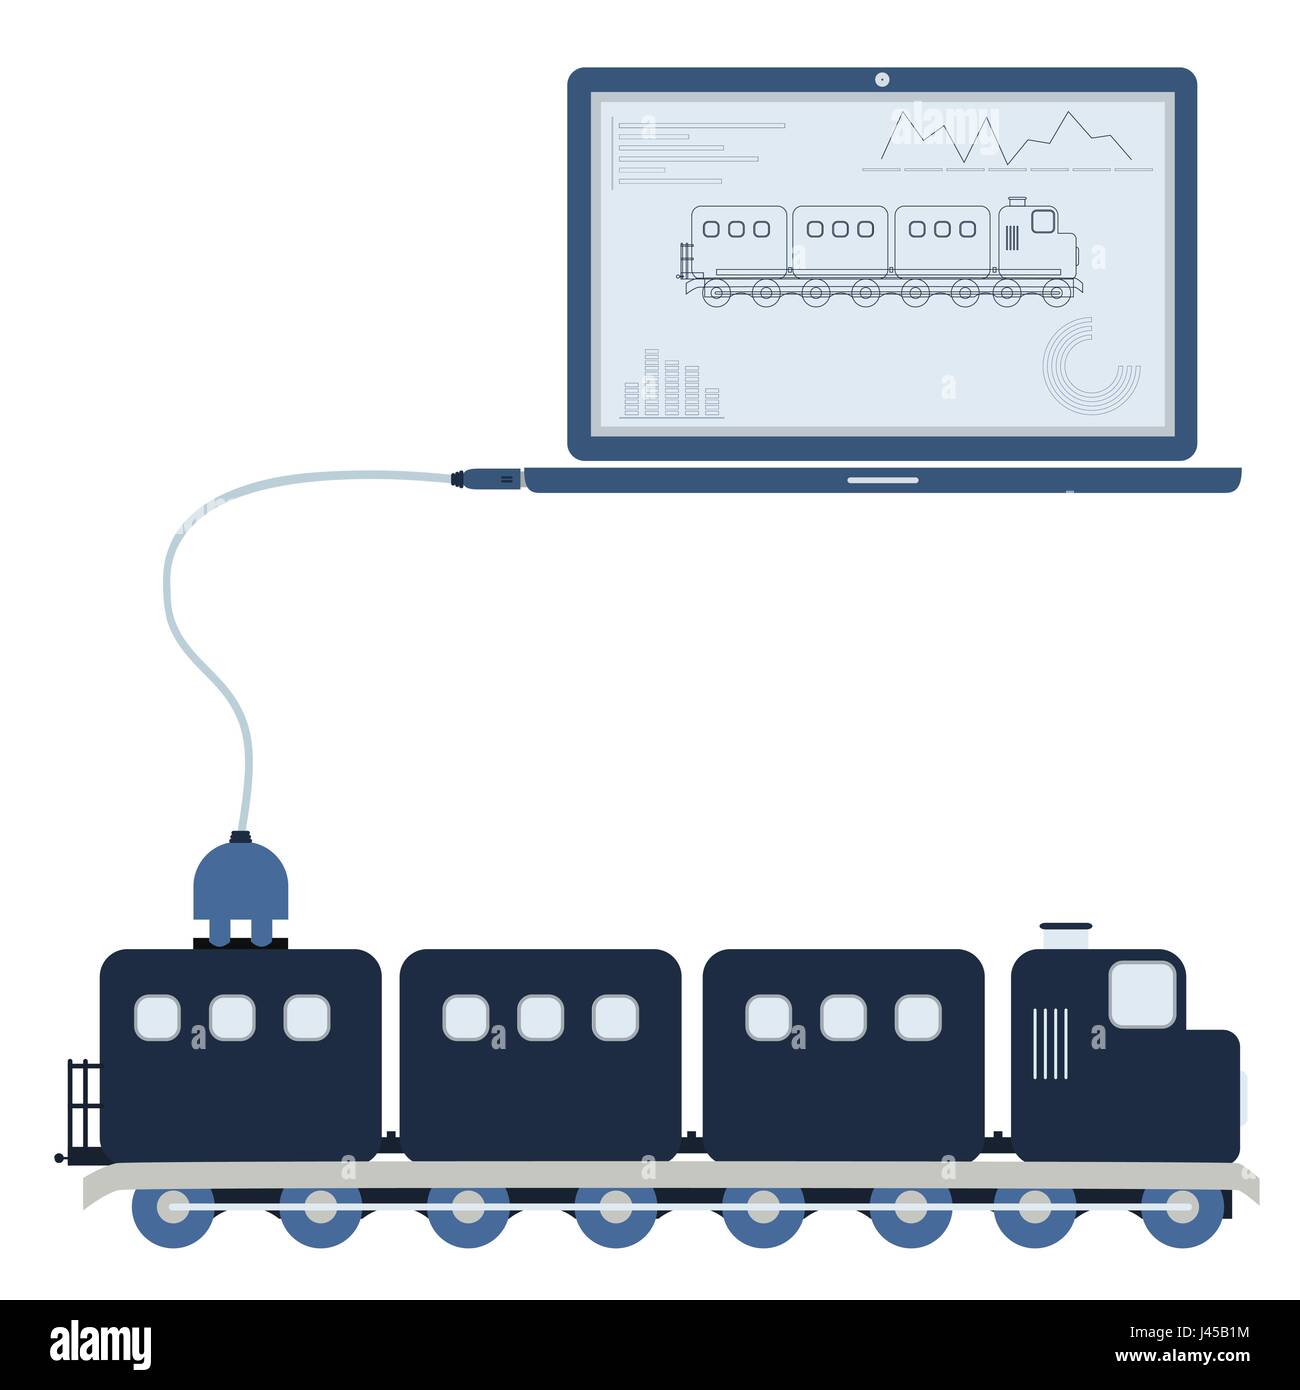 Train connected to a laptop through a usb cable. Outline of the train and graphs being shown on the computer monitor. Flat design. Isolated. Stock Vector